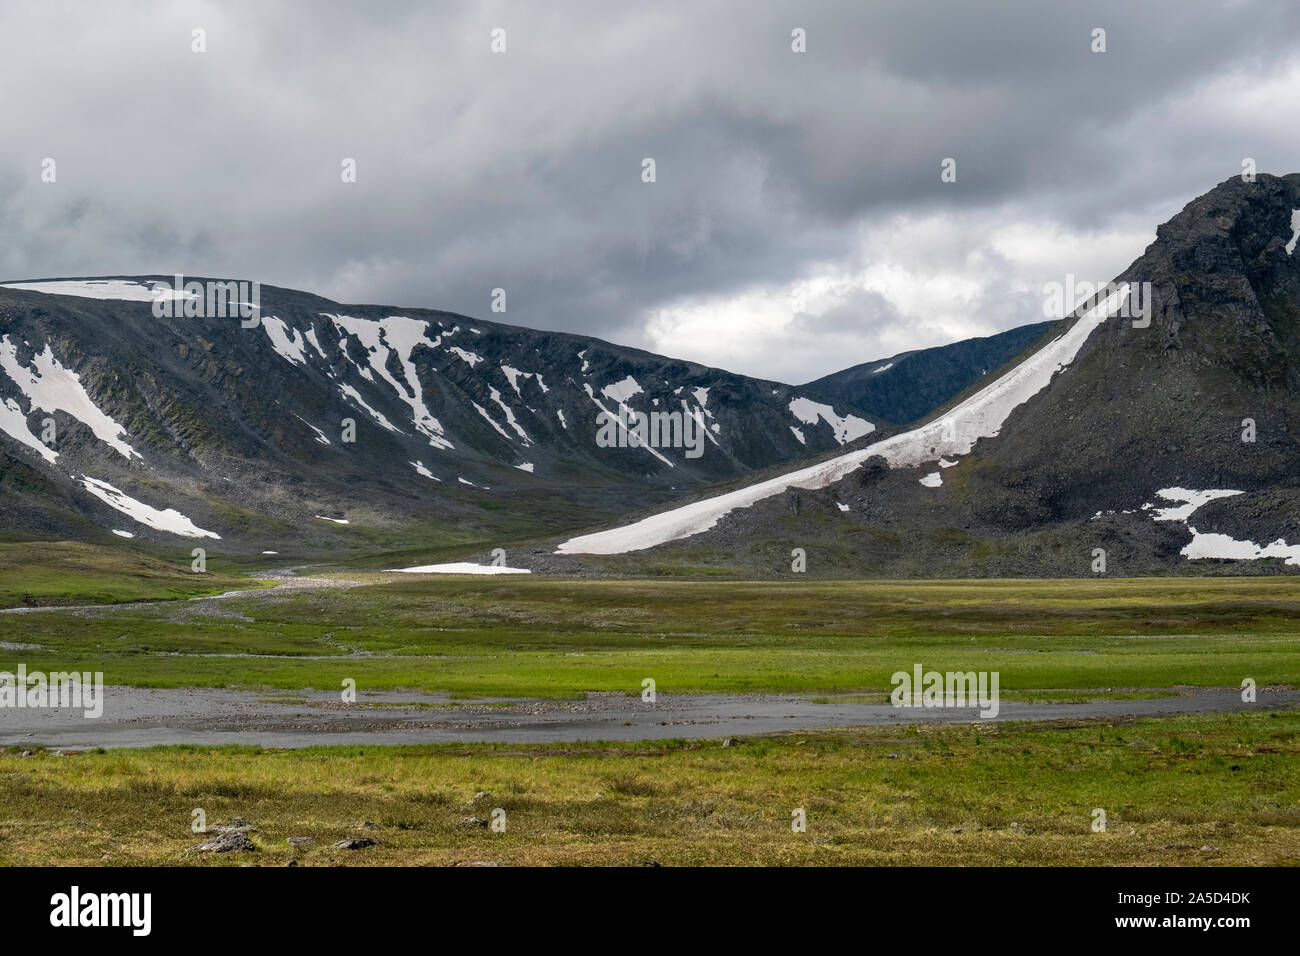 Snow partially covers the hills on the tundra in Siberia, Russia Stock Photo